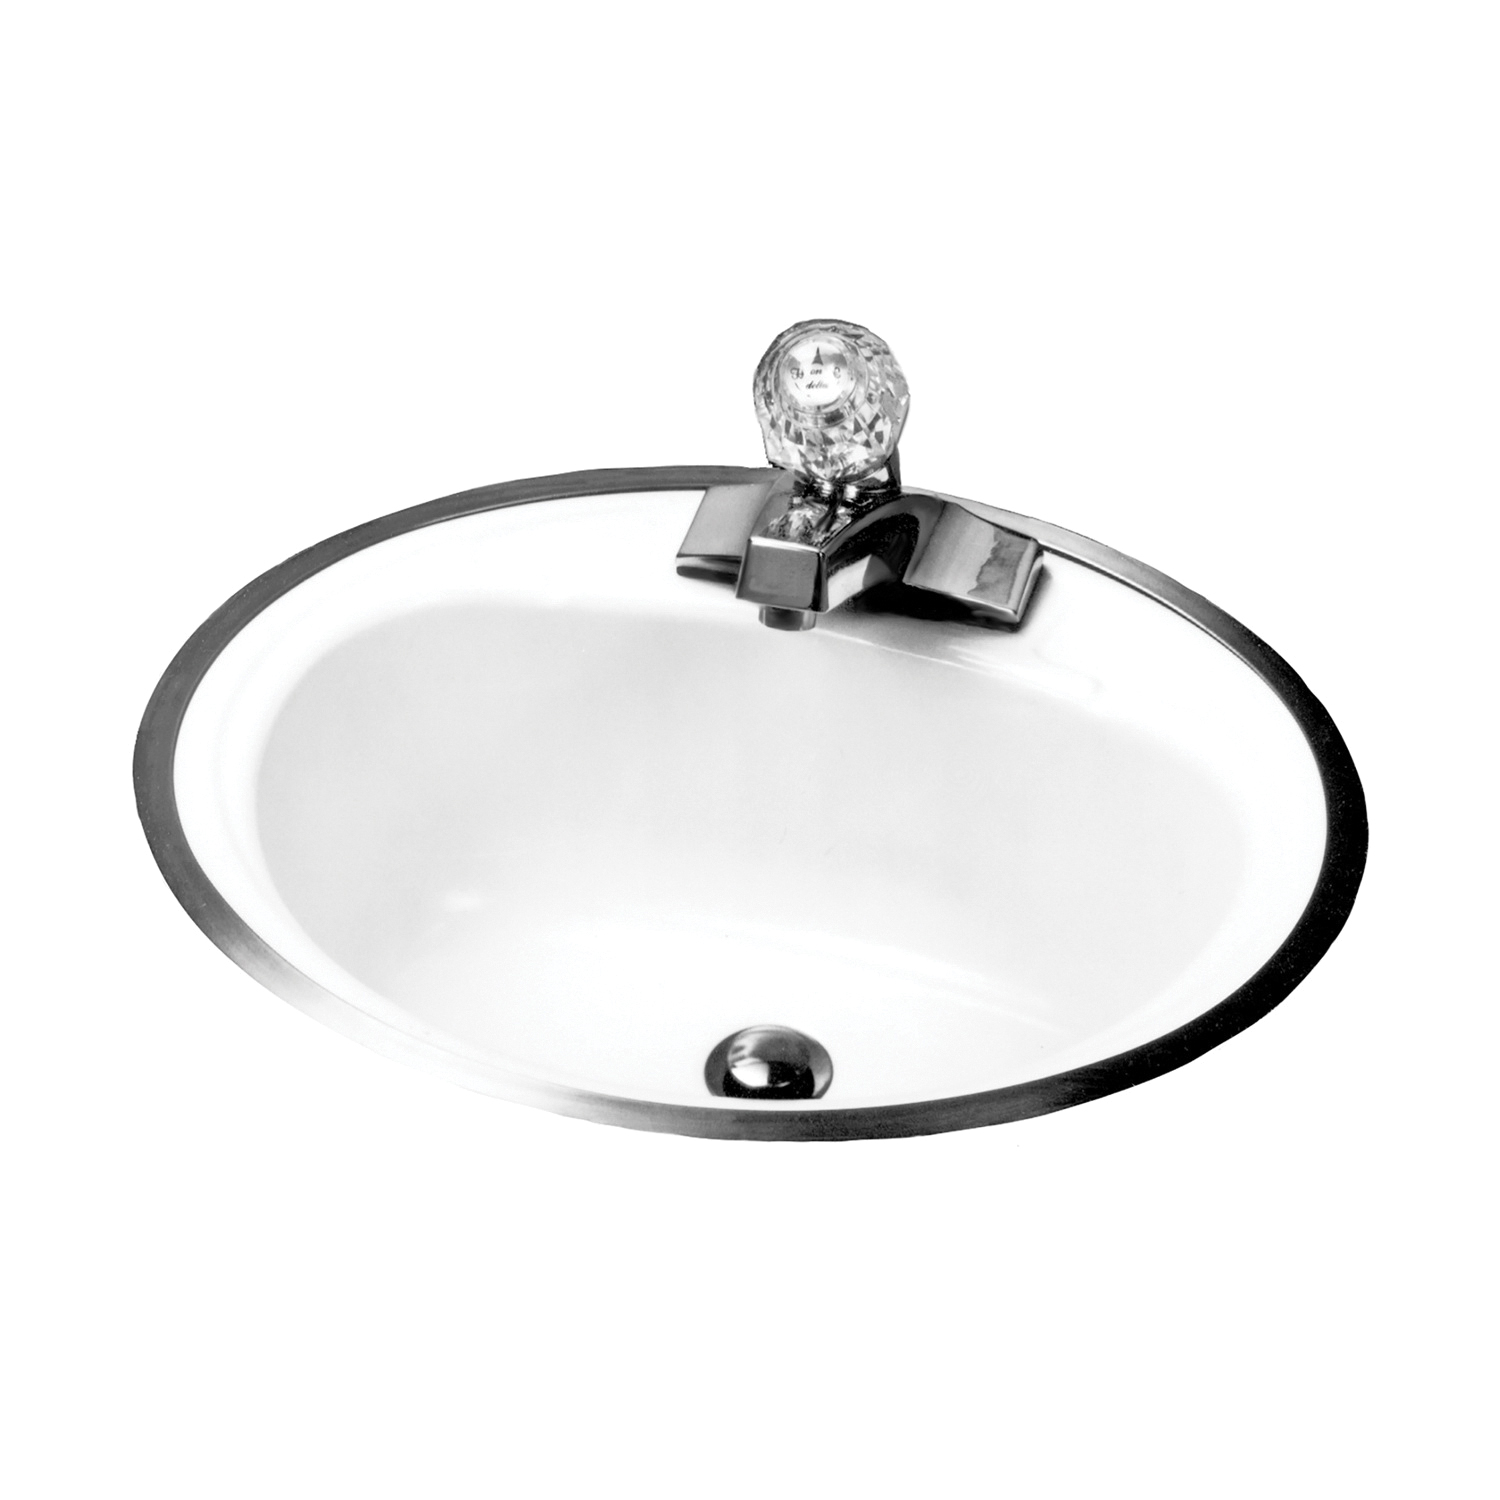 BOOTZ® 021-2440-00 Centerset Punch Lavatory Sink, Daffodil, Oval Shape, 4 in Faucet Hole Spacing, 16 in W x 7-13/16 in H, Flat Surface Mount, Porcelain/Steel, White, Domestic